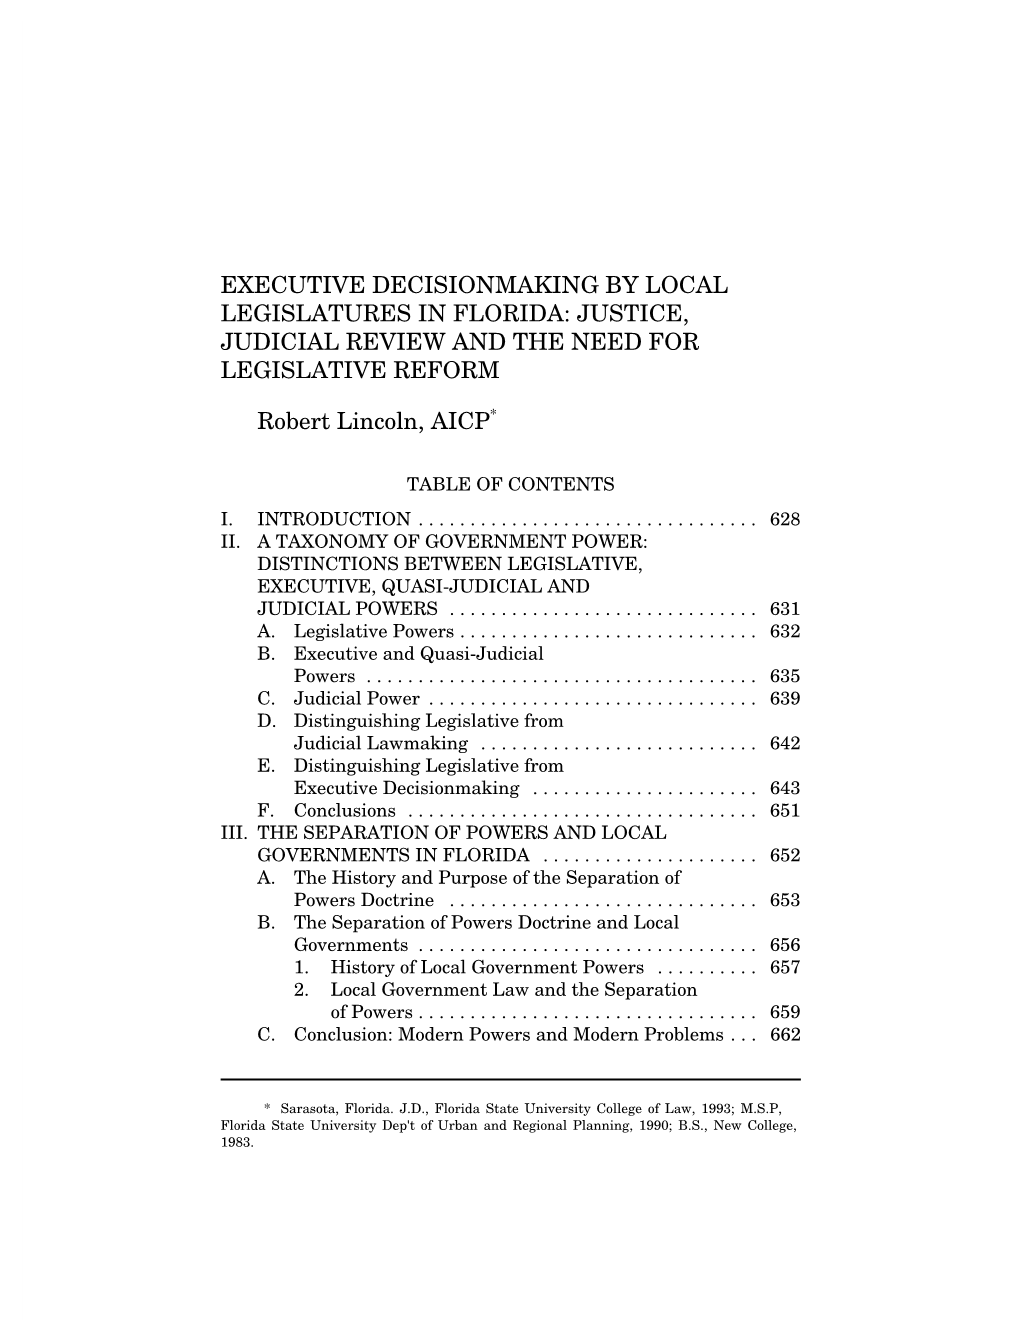 Executive Decisionmaking by Local Legislatures in Florida: Justice, Judicial Review and the Need for Legislative Reform